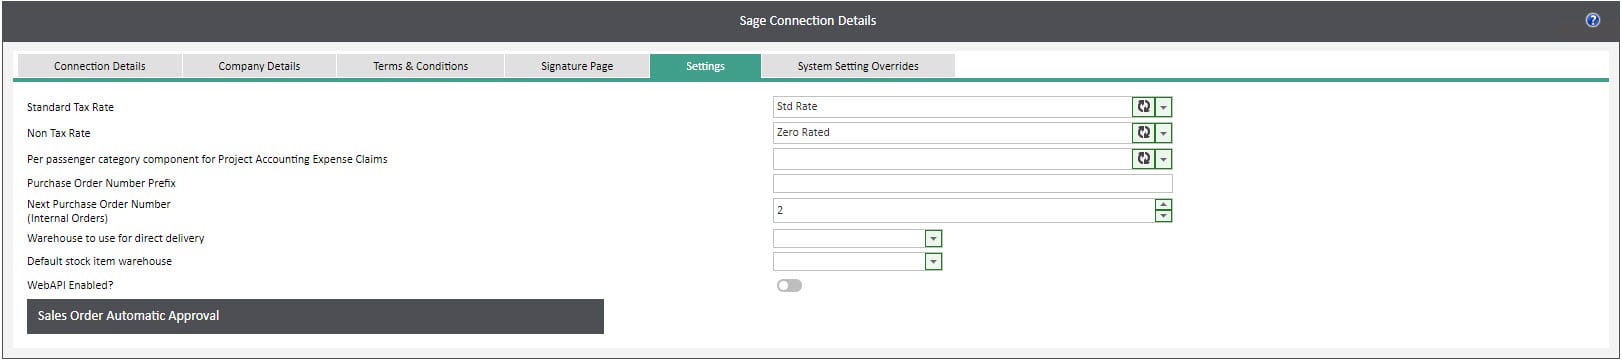 Sicon WAP System Settings Help and User Guide - WAP System HUG Section 29.5 Image 1